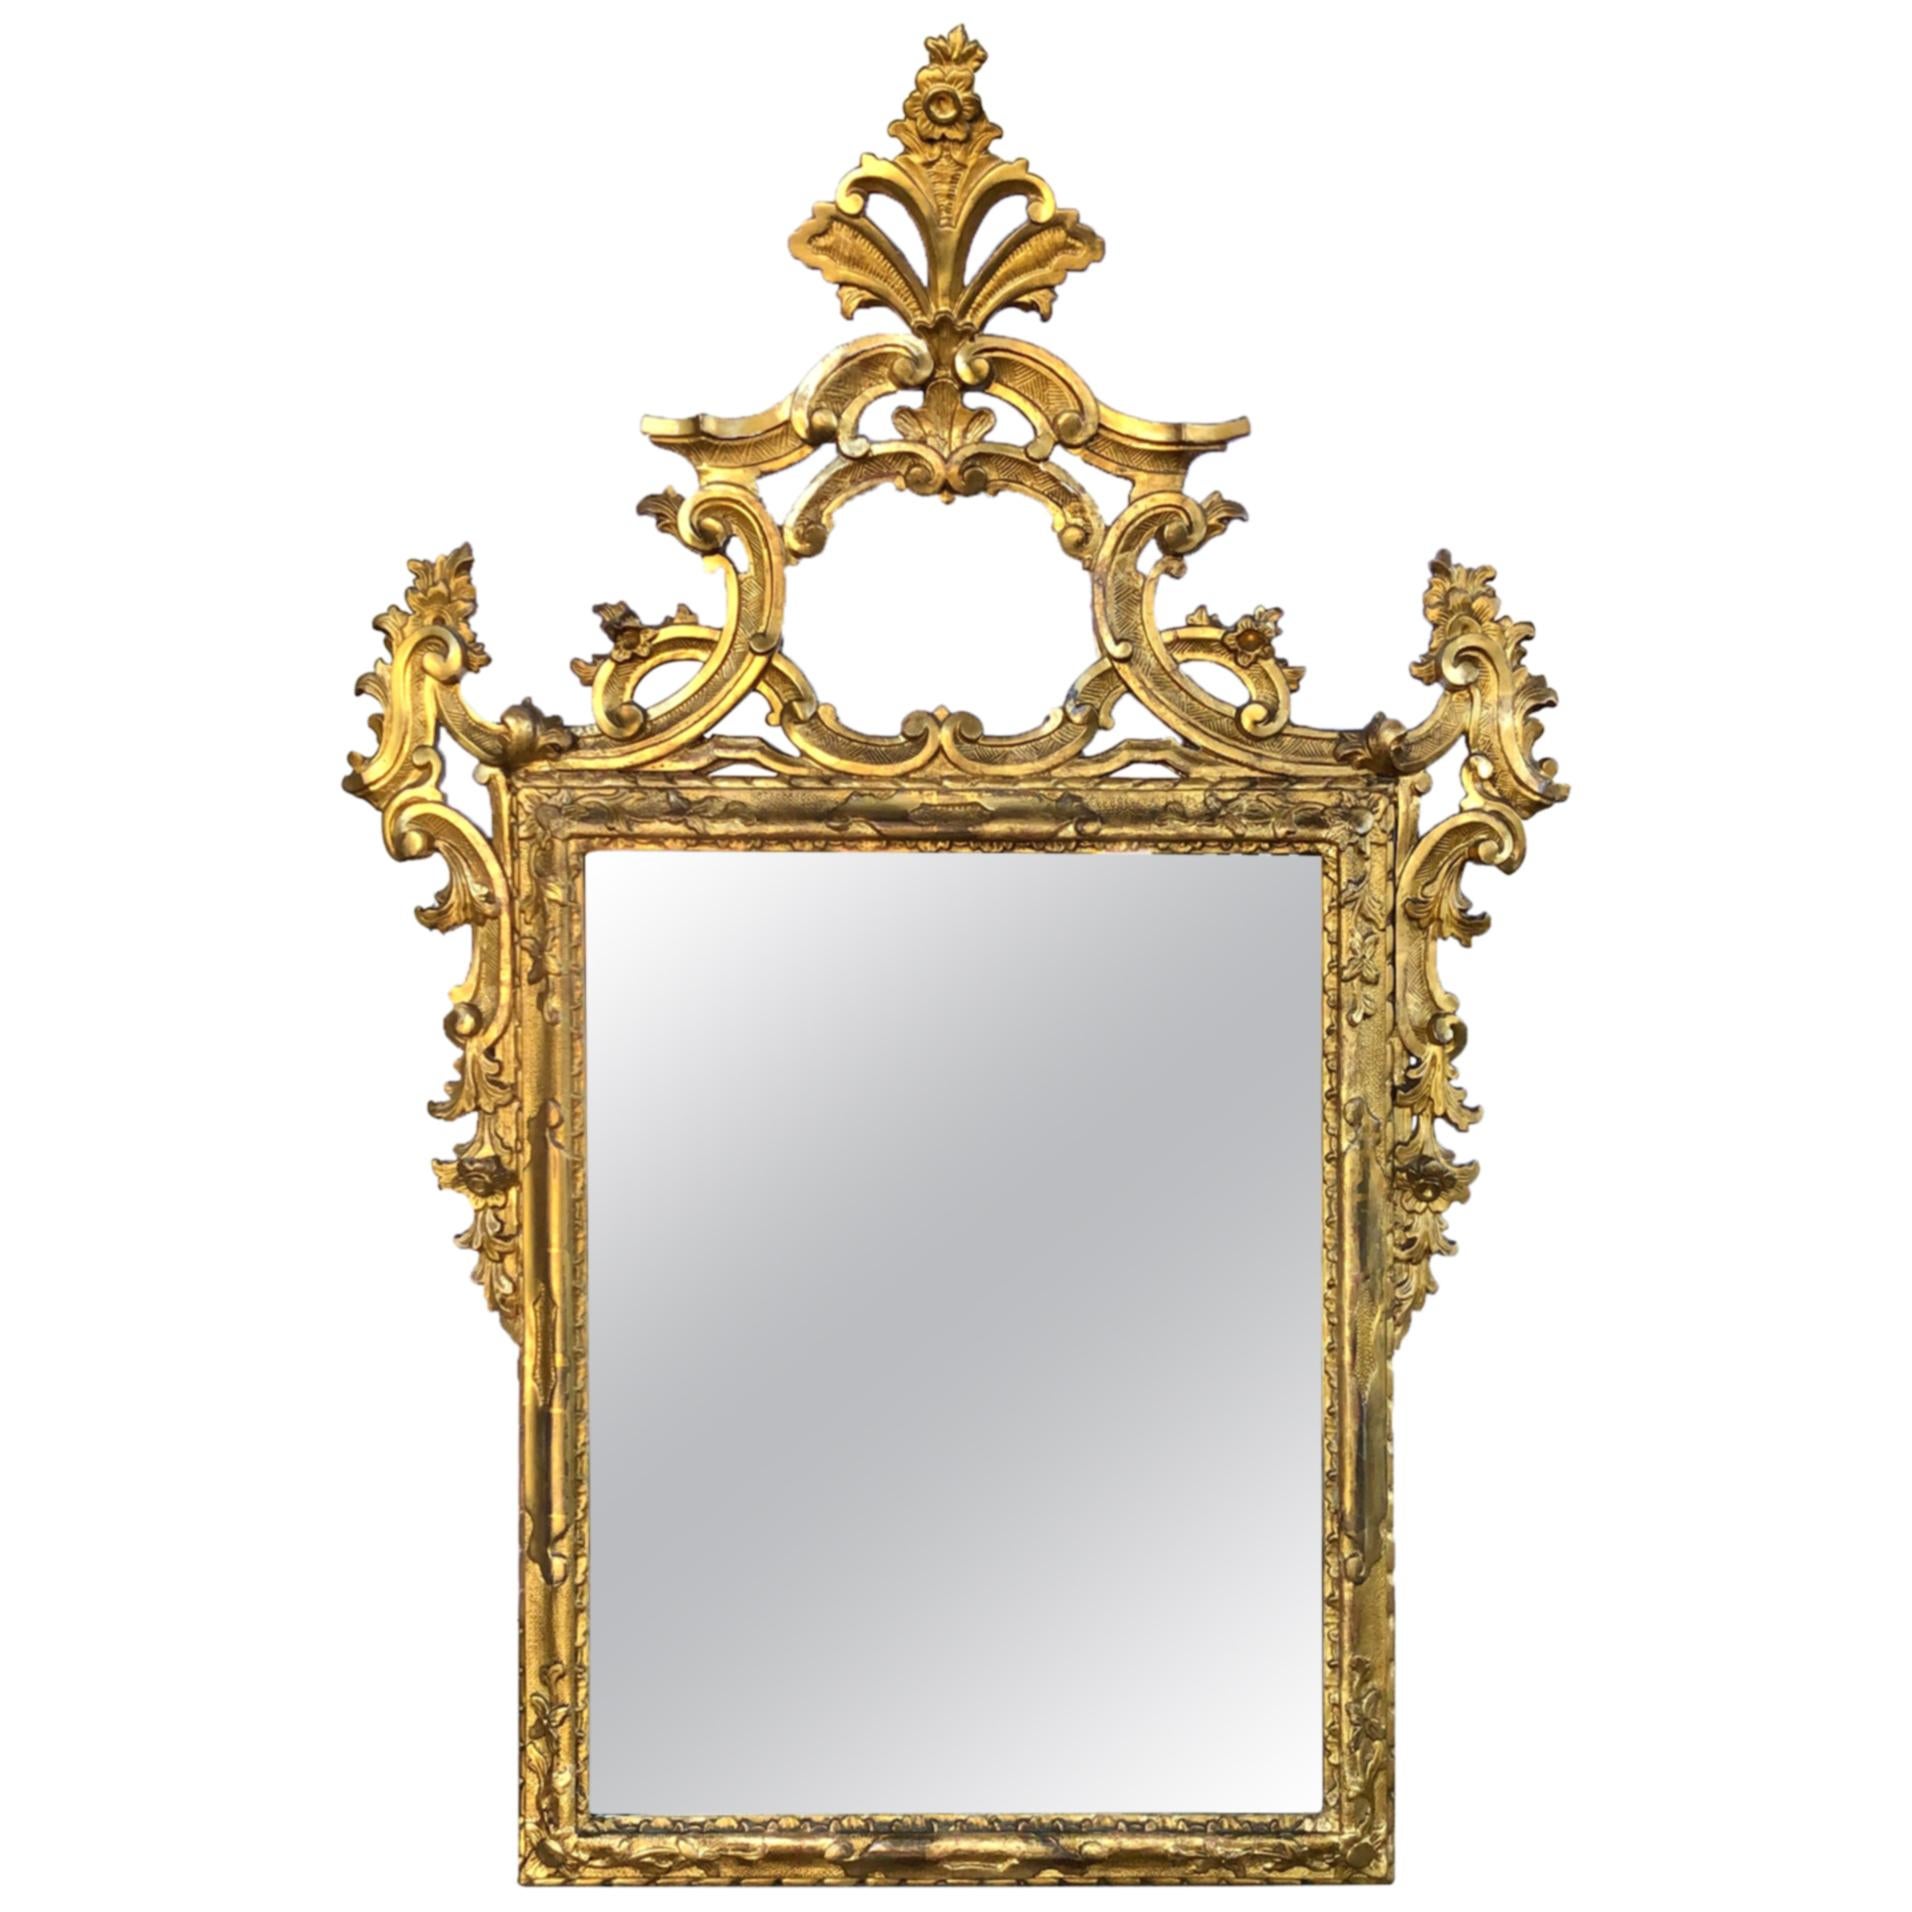 Well-Carved English George II Style Giltwood Mirror with Dramatic Crest For Sale